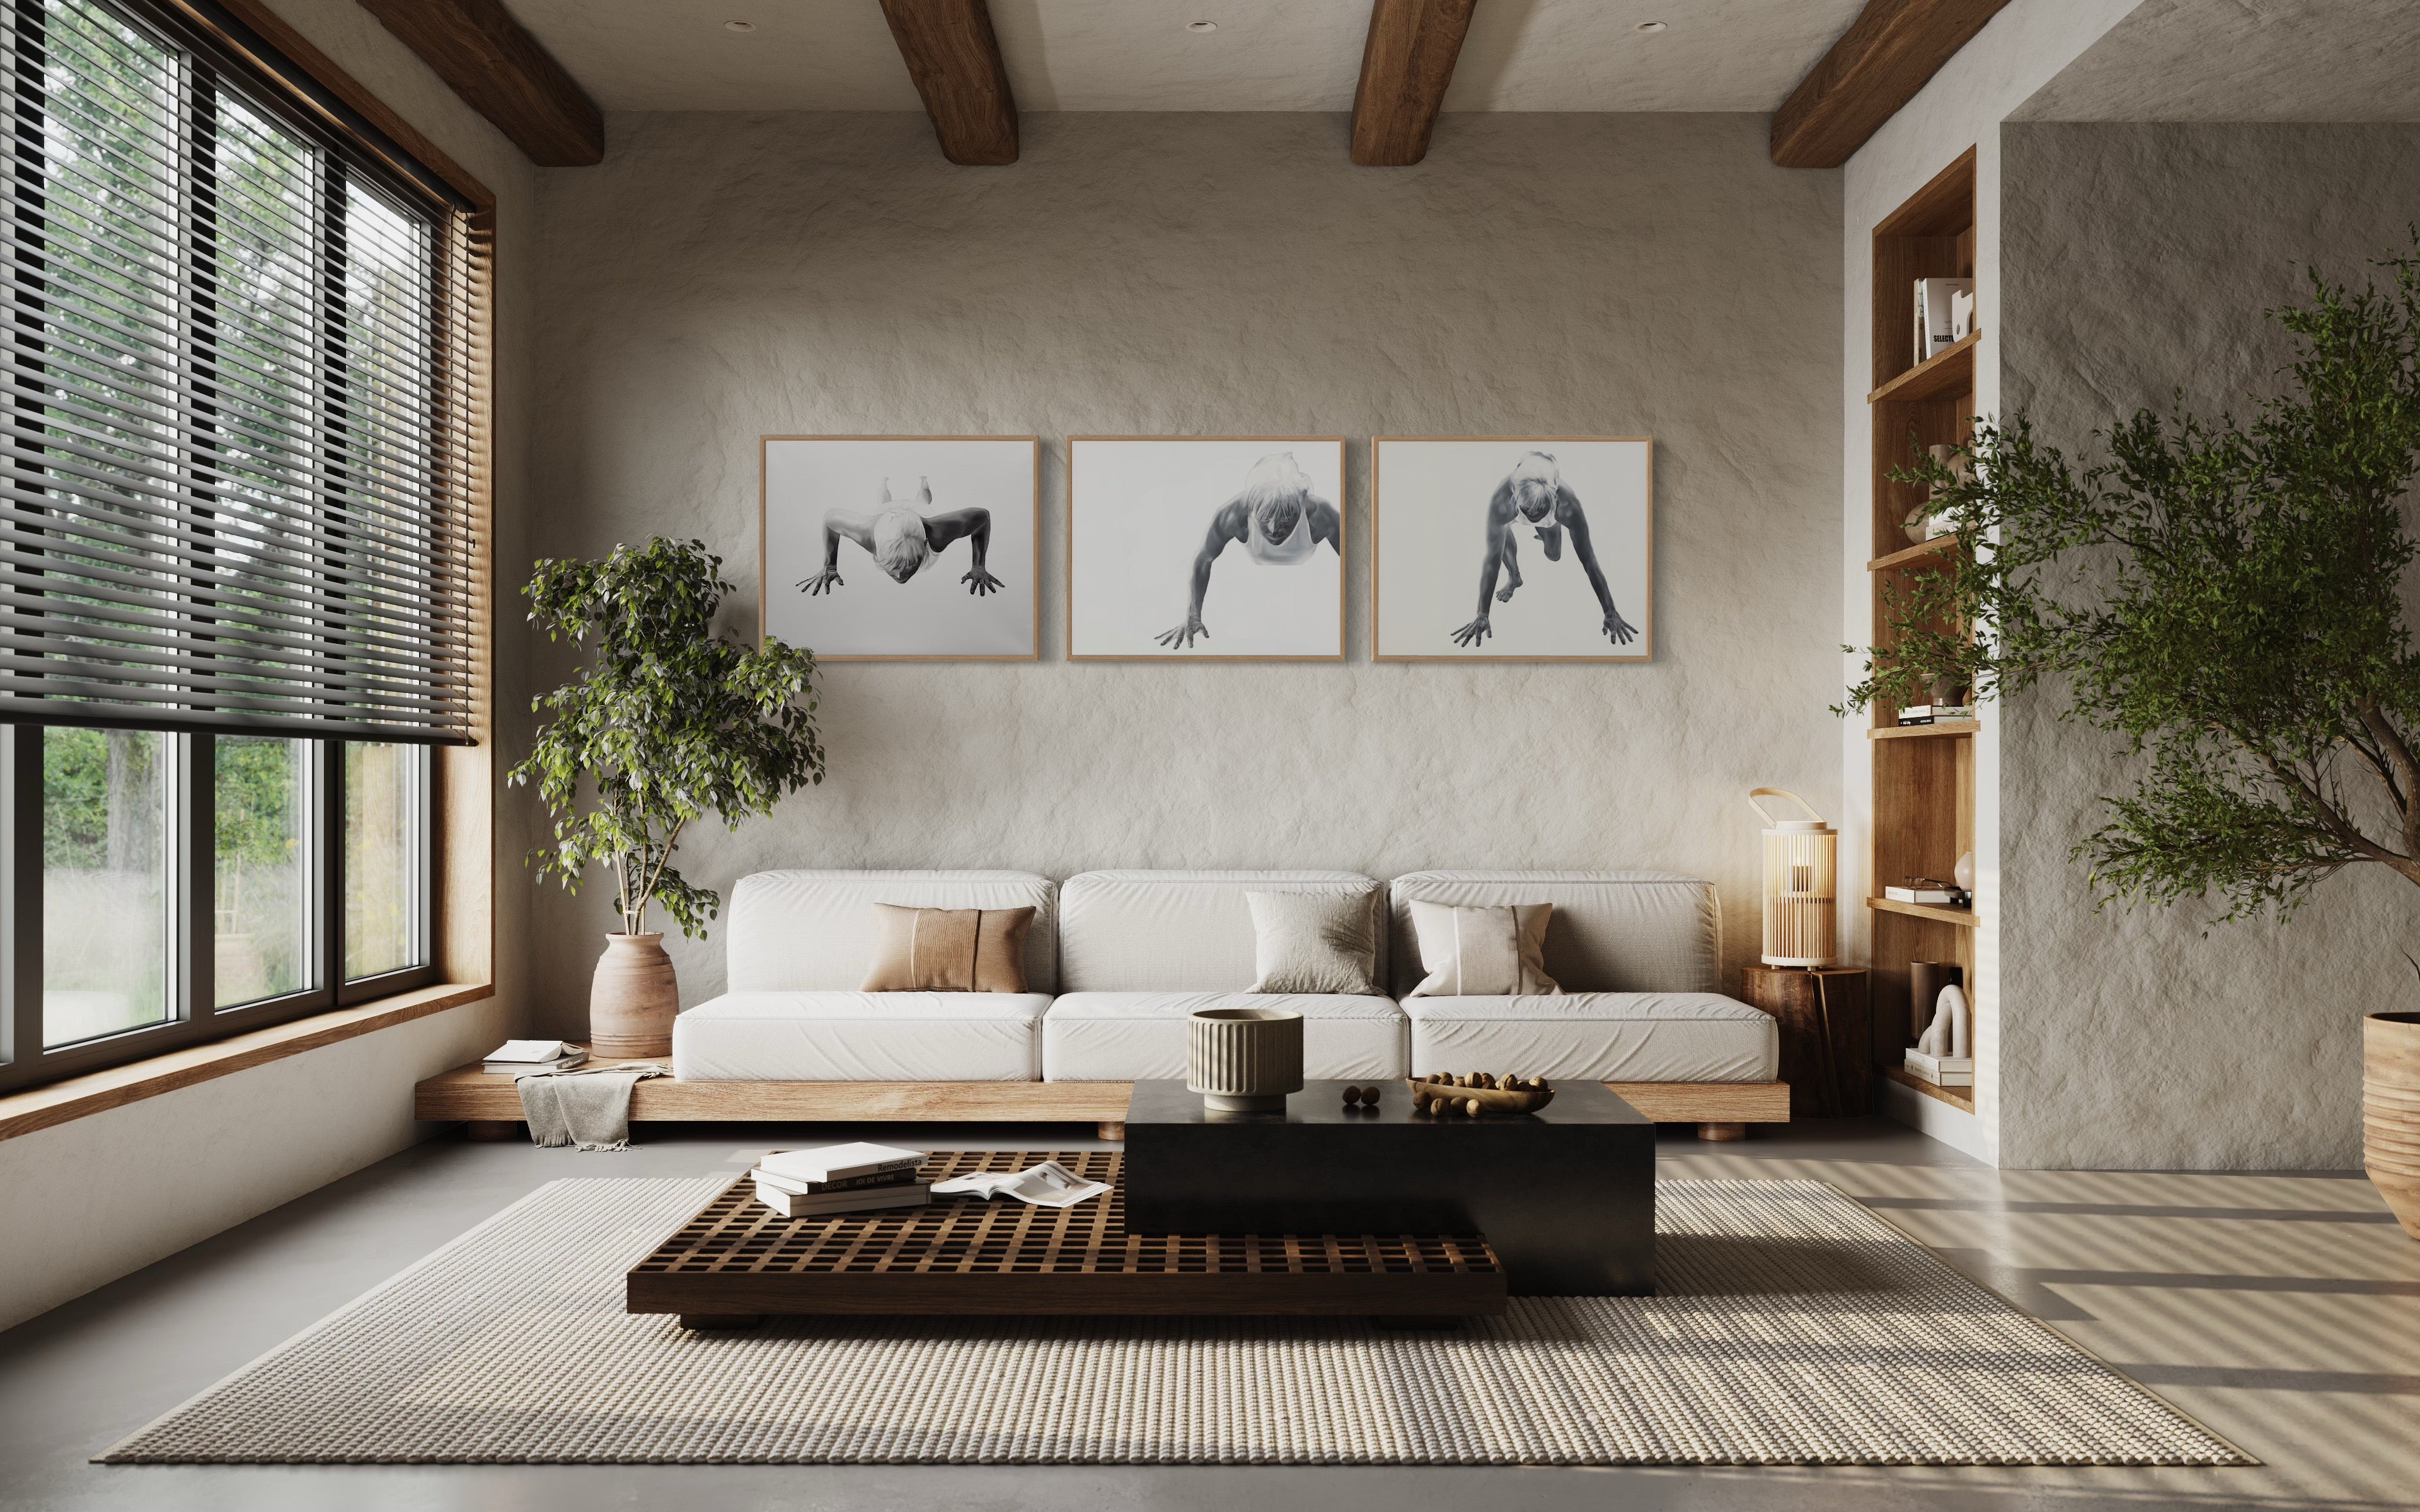 Living room in minimalistic interior with prints of Jenny Mørk´s paintings titled "Get up again" on the wall with oak frames.